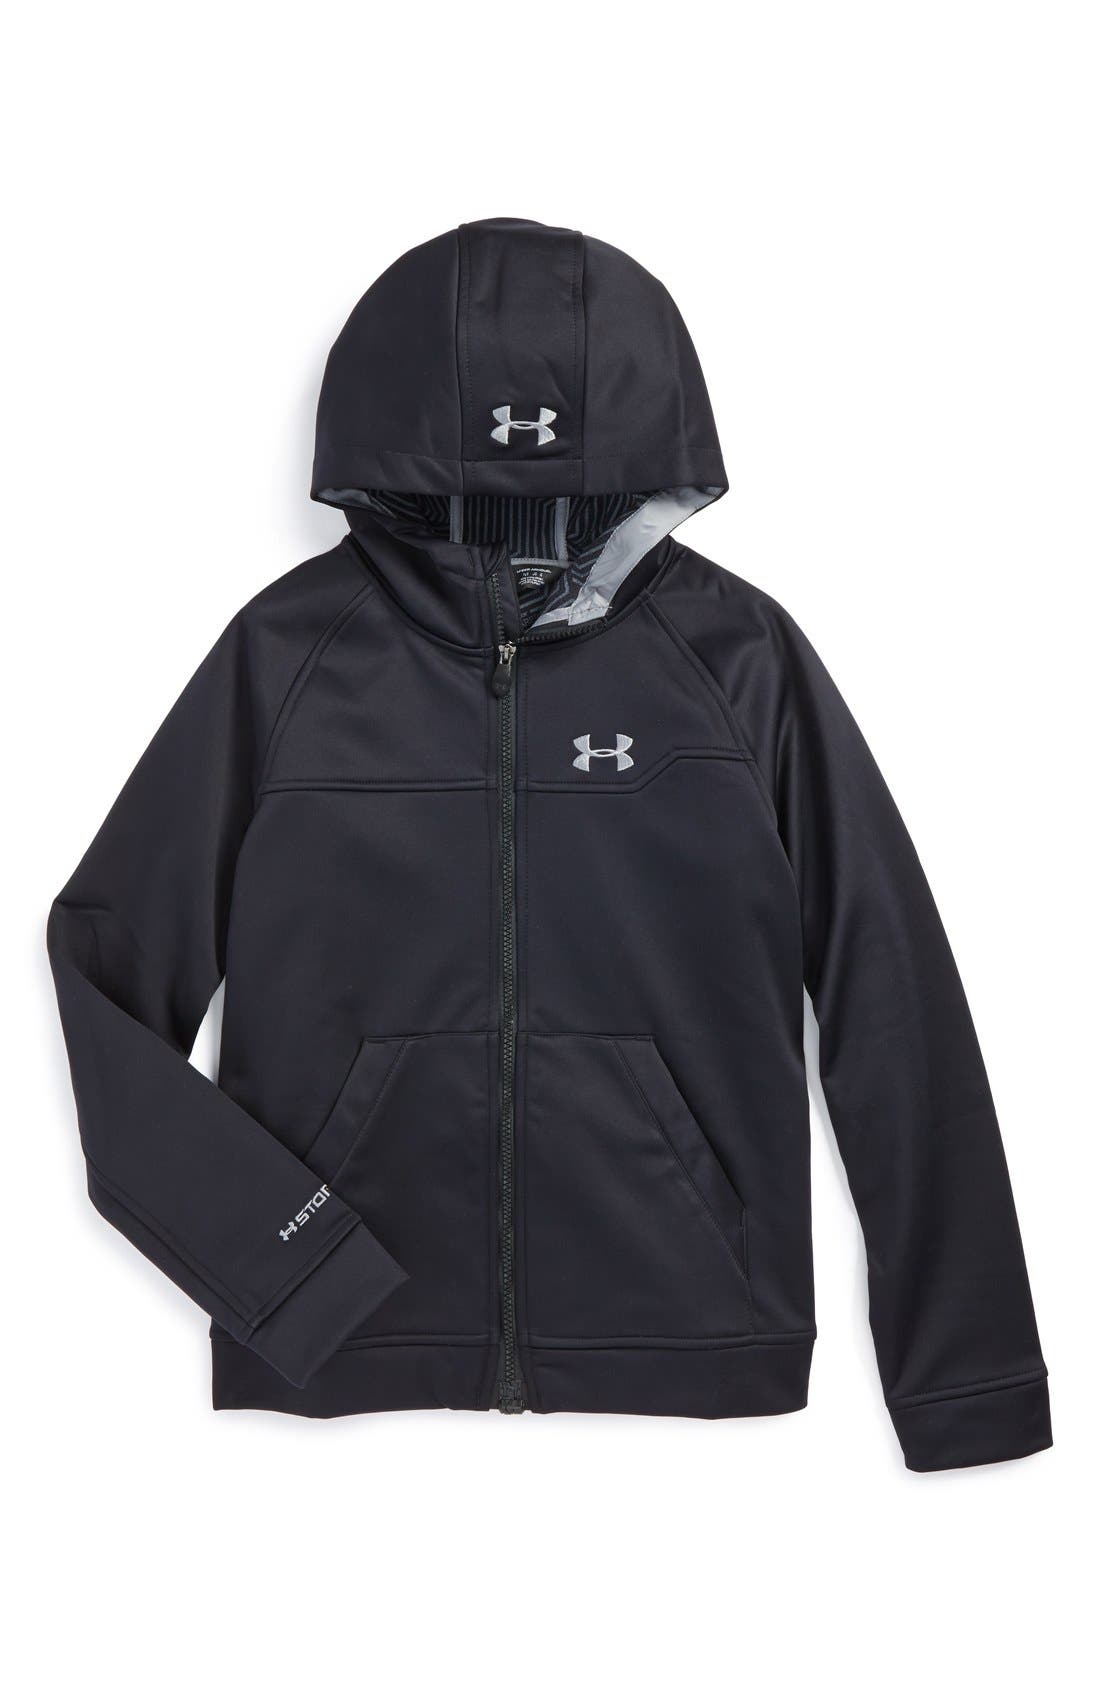 under armour storm youth jacket